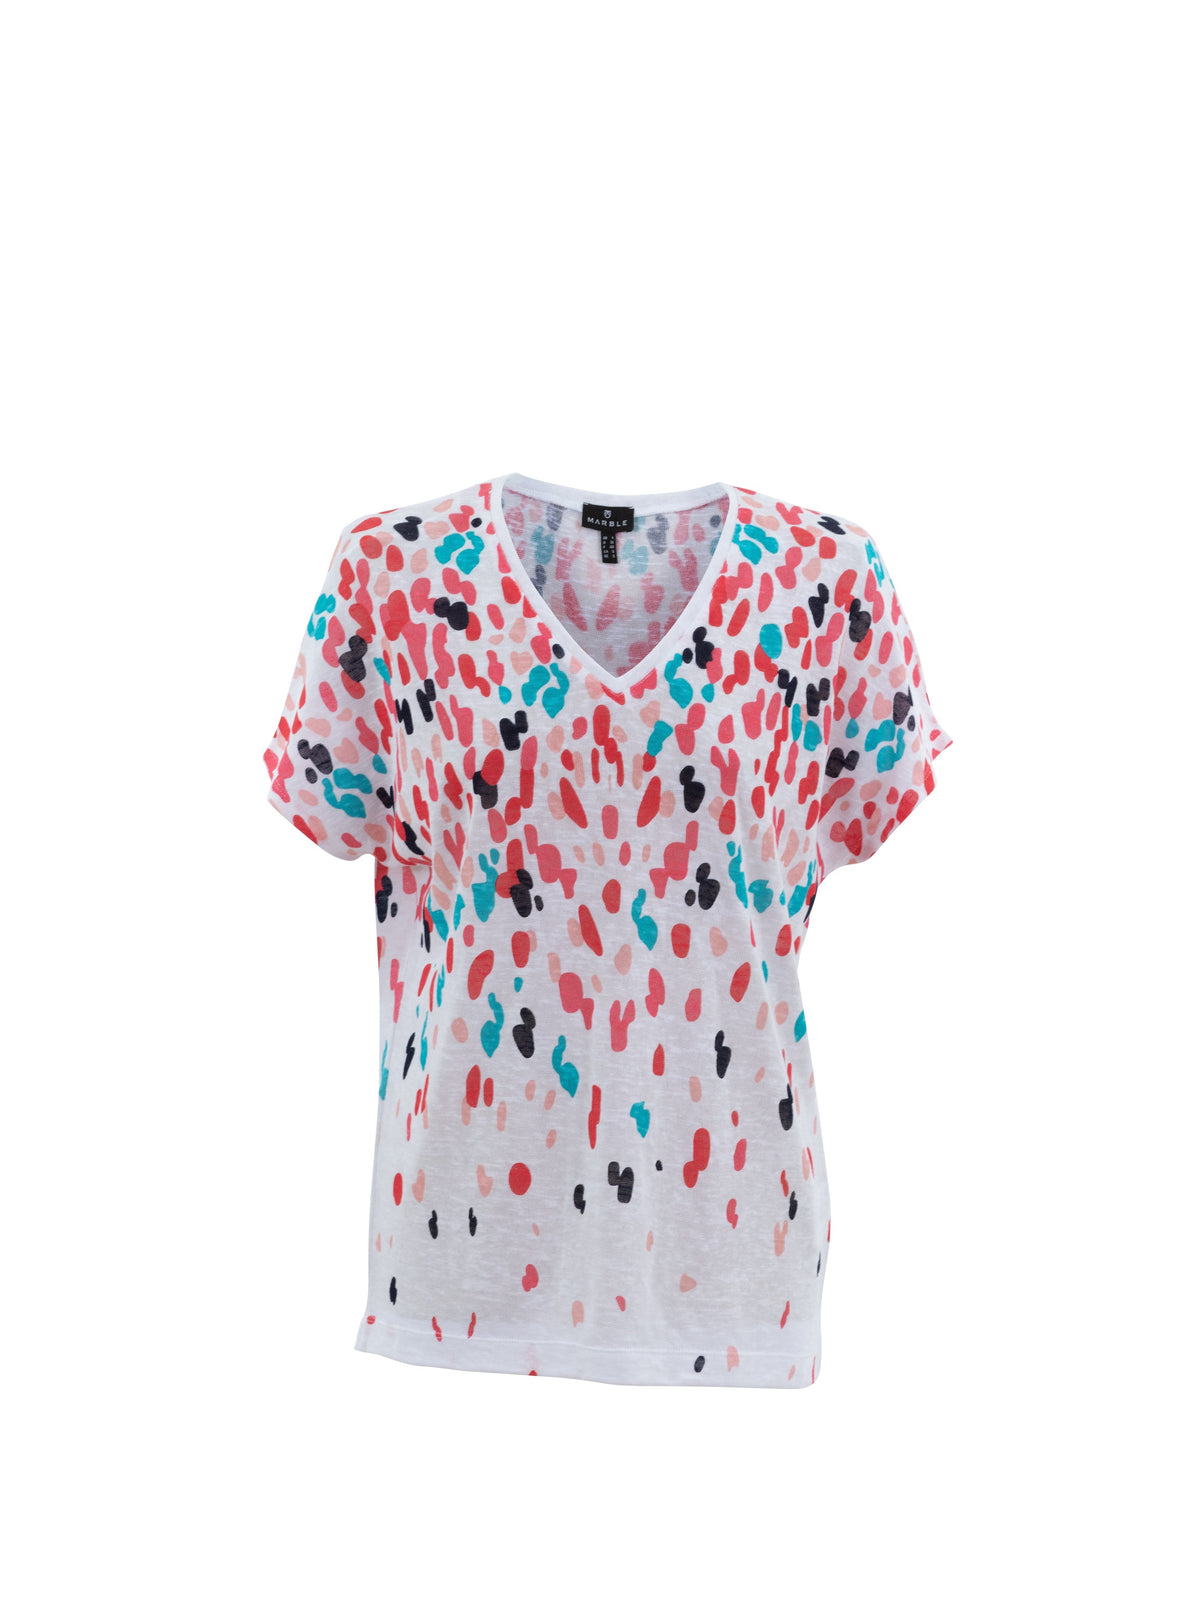 Marble Multi Color T-Shirt